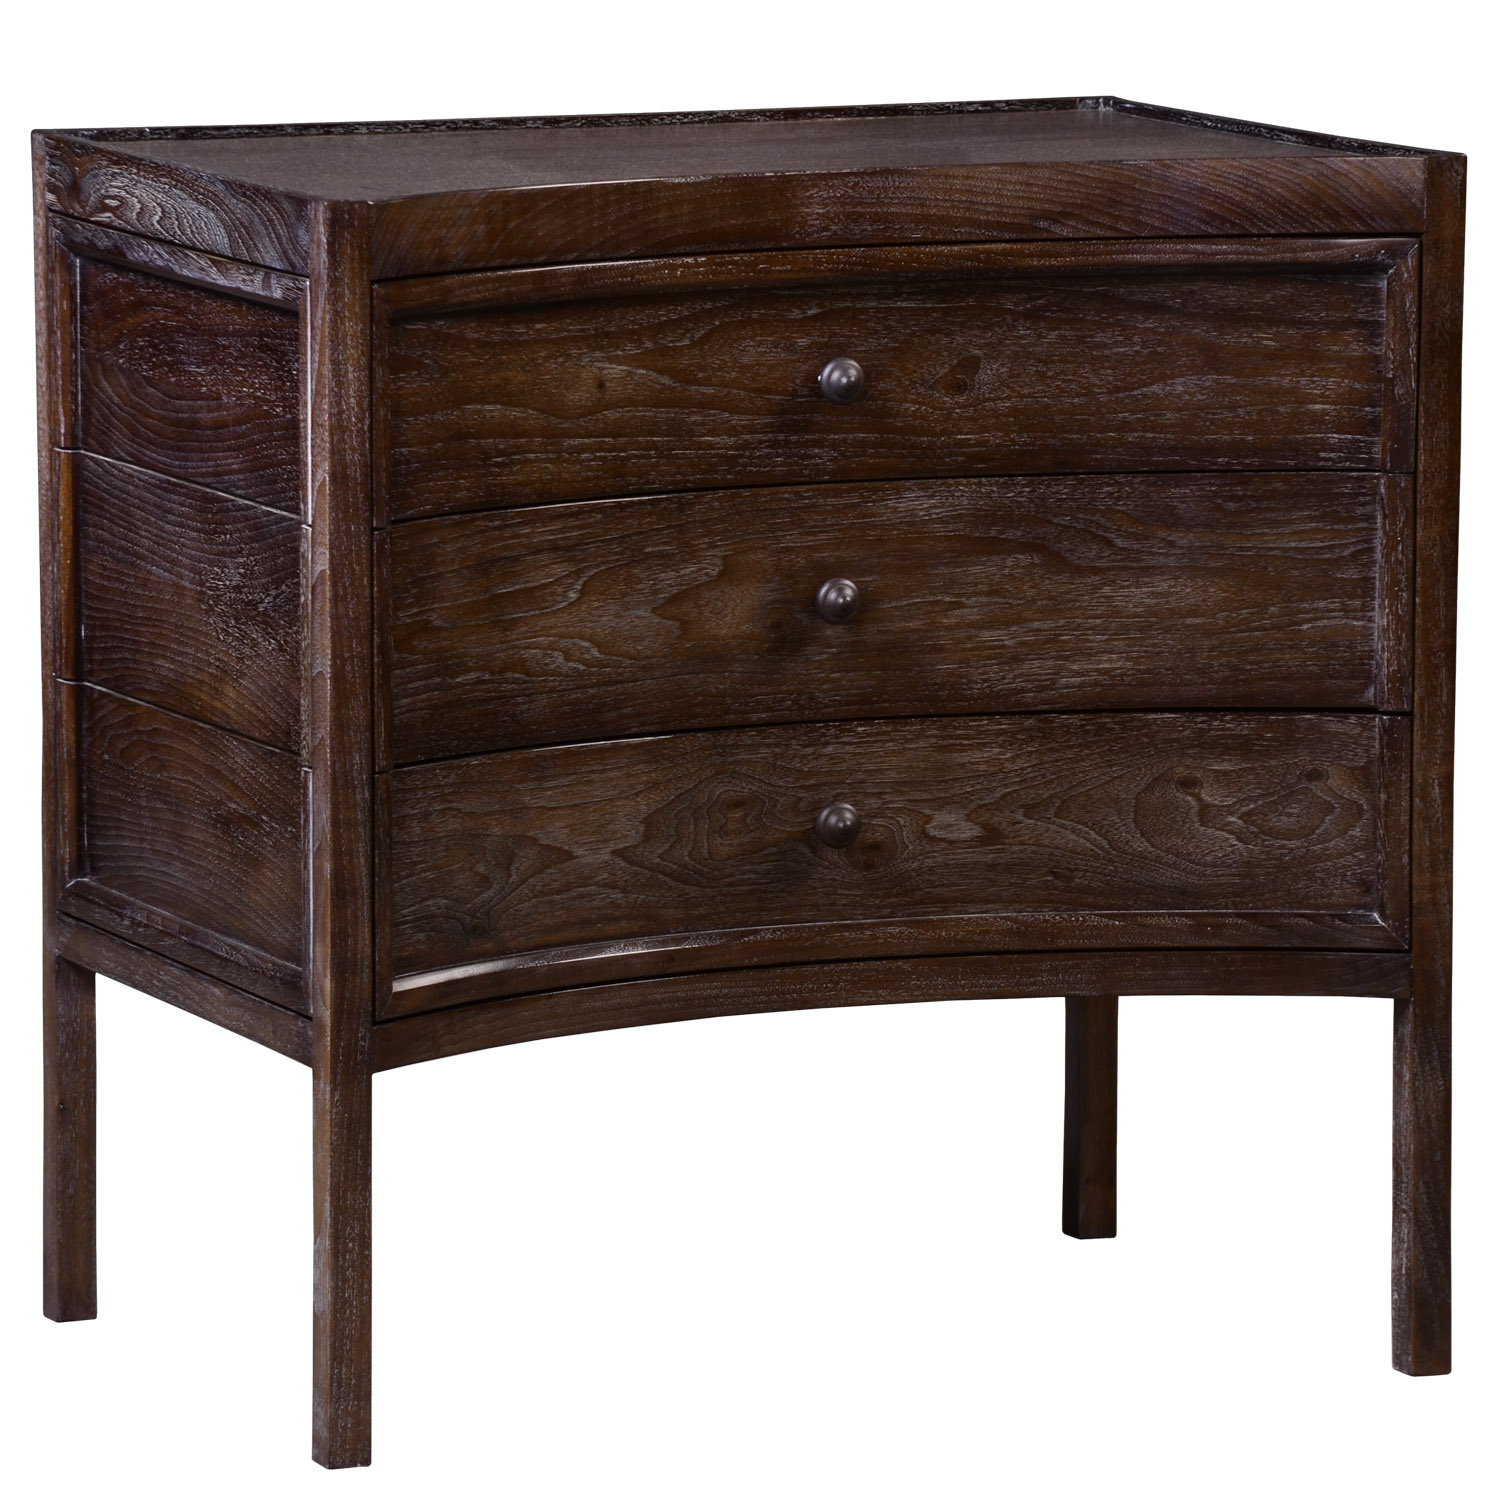 Cassidy transitional traditional chest or nightstand with curved front, three drawers, and in a cerused walnut finish by Woodland furniture in Idaho Falls